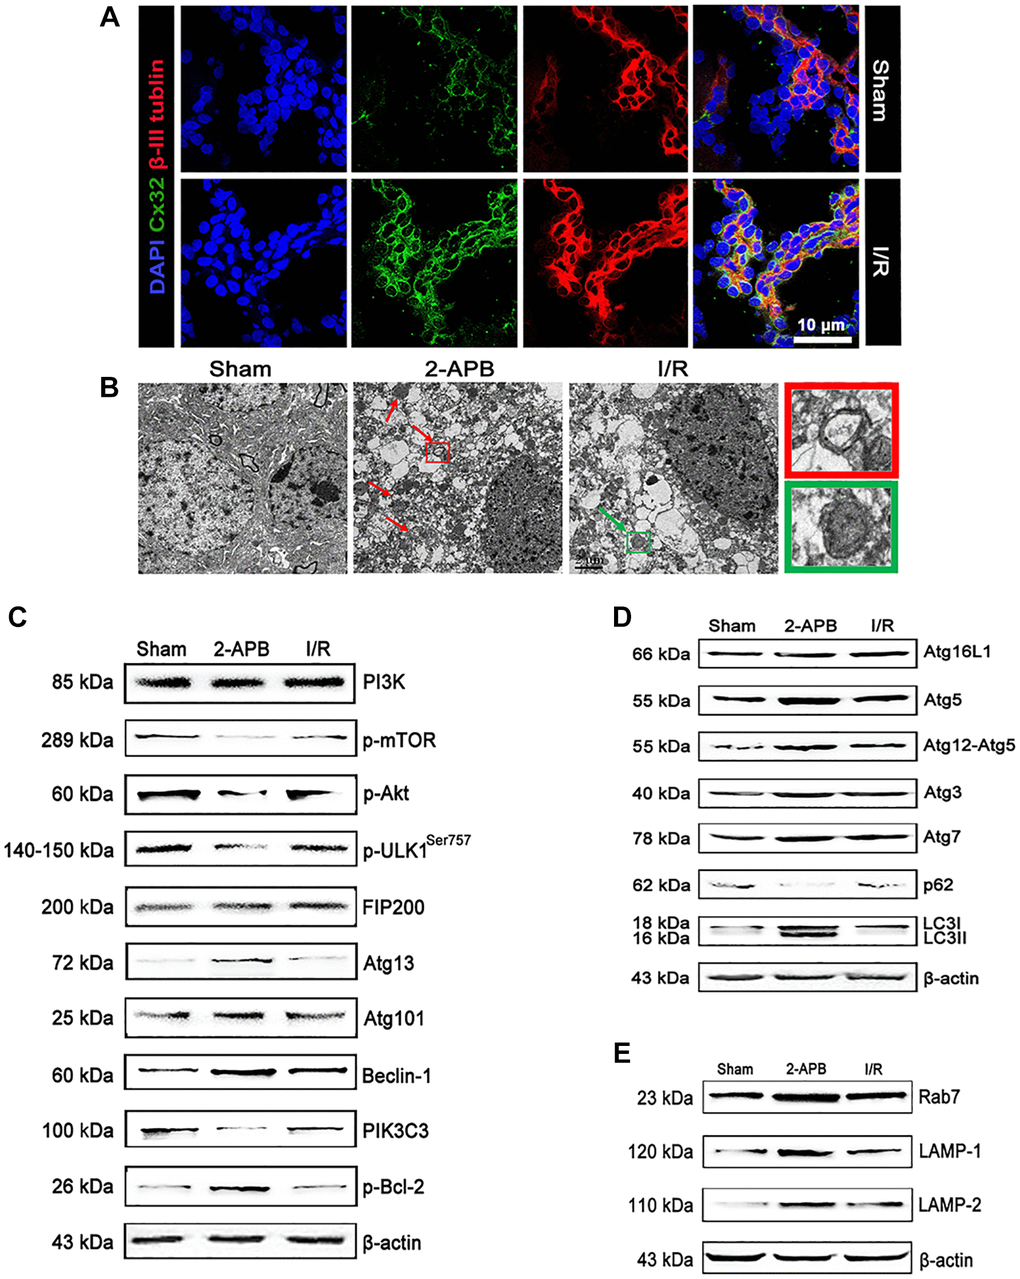 I/R induced up-regulation of Cx32 expression and activation of autophagy. (A) Double labeling of Cx32 and β-tubulin in the brains of Sham or I/R group. Scale bars, 50 μm. (B) Images acquired by transmission electron microscope. The arrow marks autophagic vacuoles. (C–E) Representative bands of autophagy-related proteins after I/R. Variation in protein loading was determined by blotting with an anti-β-actin antibody.